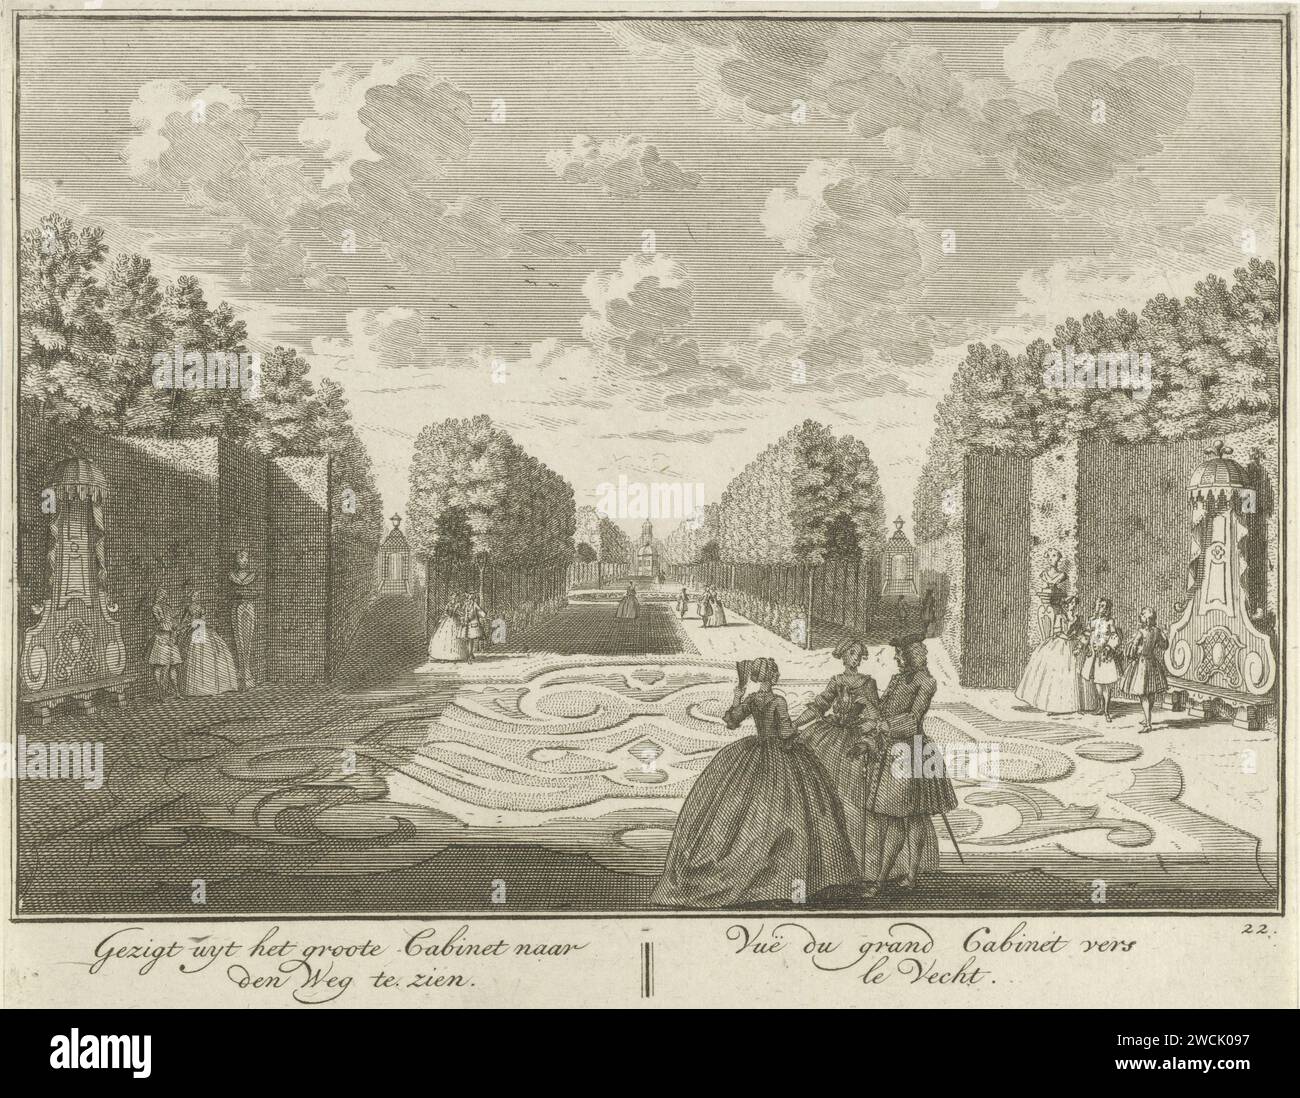 View from the cabinet on the garden of Huis ter Meer in Maarssen, Hendrik de Leth, c. 1740 print View from the cabinet on the French garden of Huis ter Meer. Spread through the garden are groups of figures. The print is part of a series with 26 faces at Huis ter Meer and the accompanying estate in Maarssen.  paper etching country-house. French or architectonic garden; formal garden House Ter Meer Stock Photo